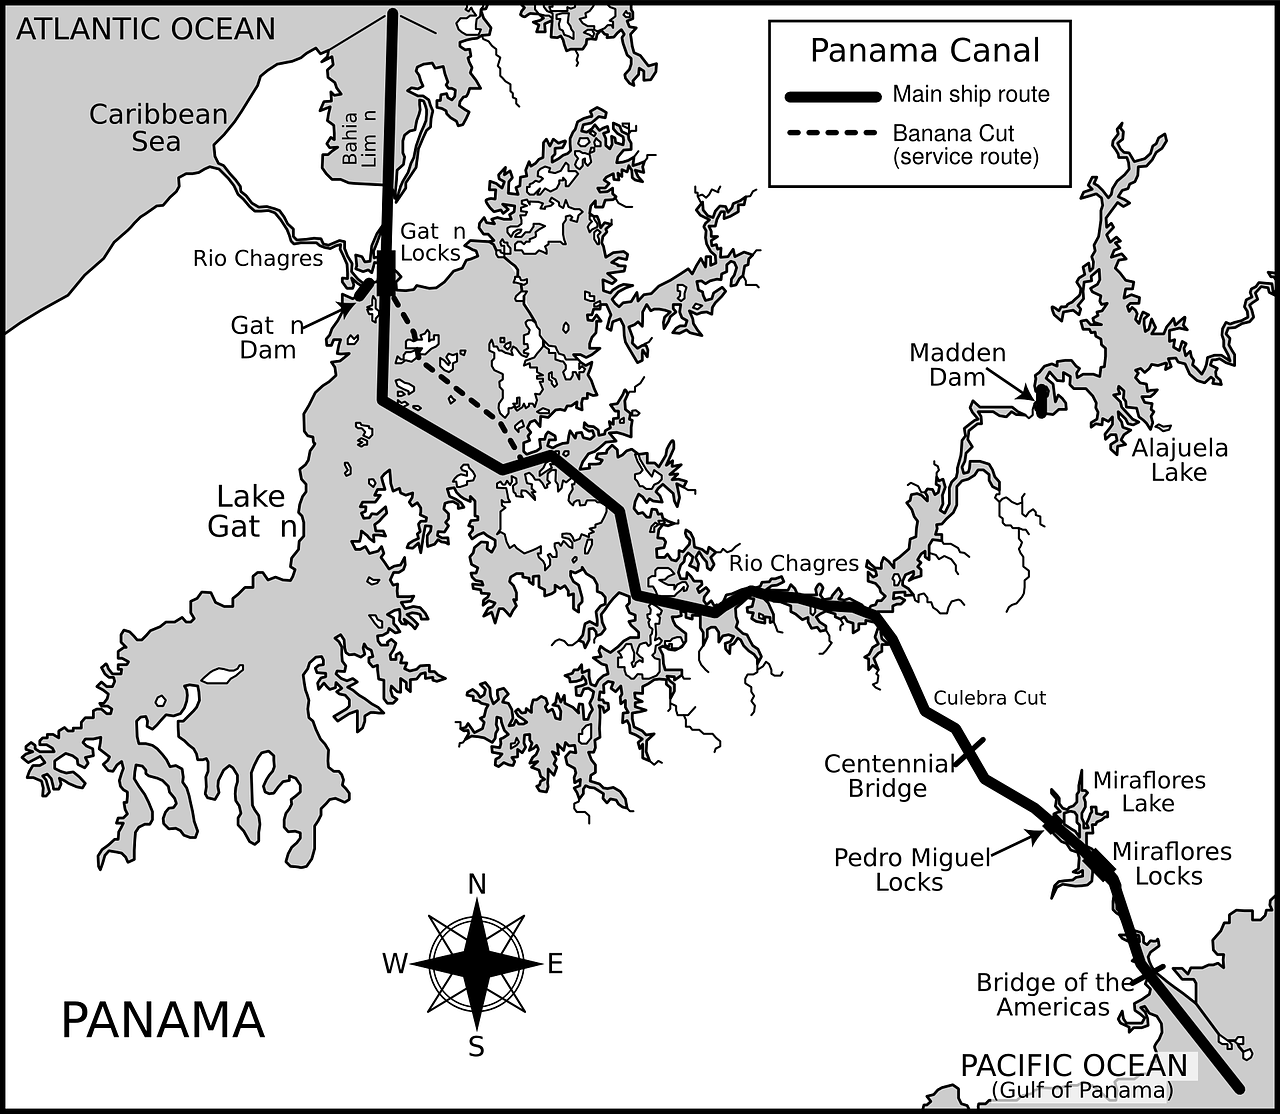 panama canal,panama map,isthmus of panama,canal de panamá,shipping canal,map,free vector graphics,free pictures, free photos, free images, royalty free, free illustrations, public domain